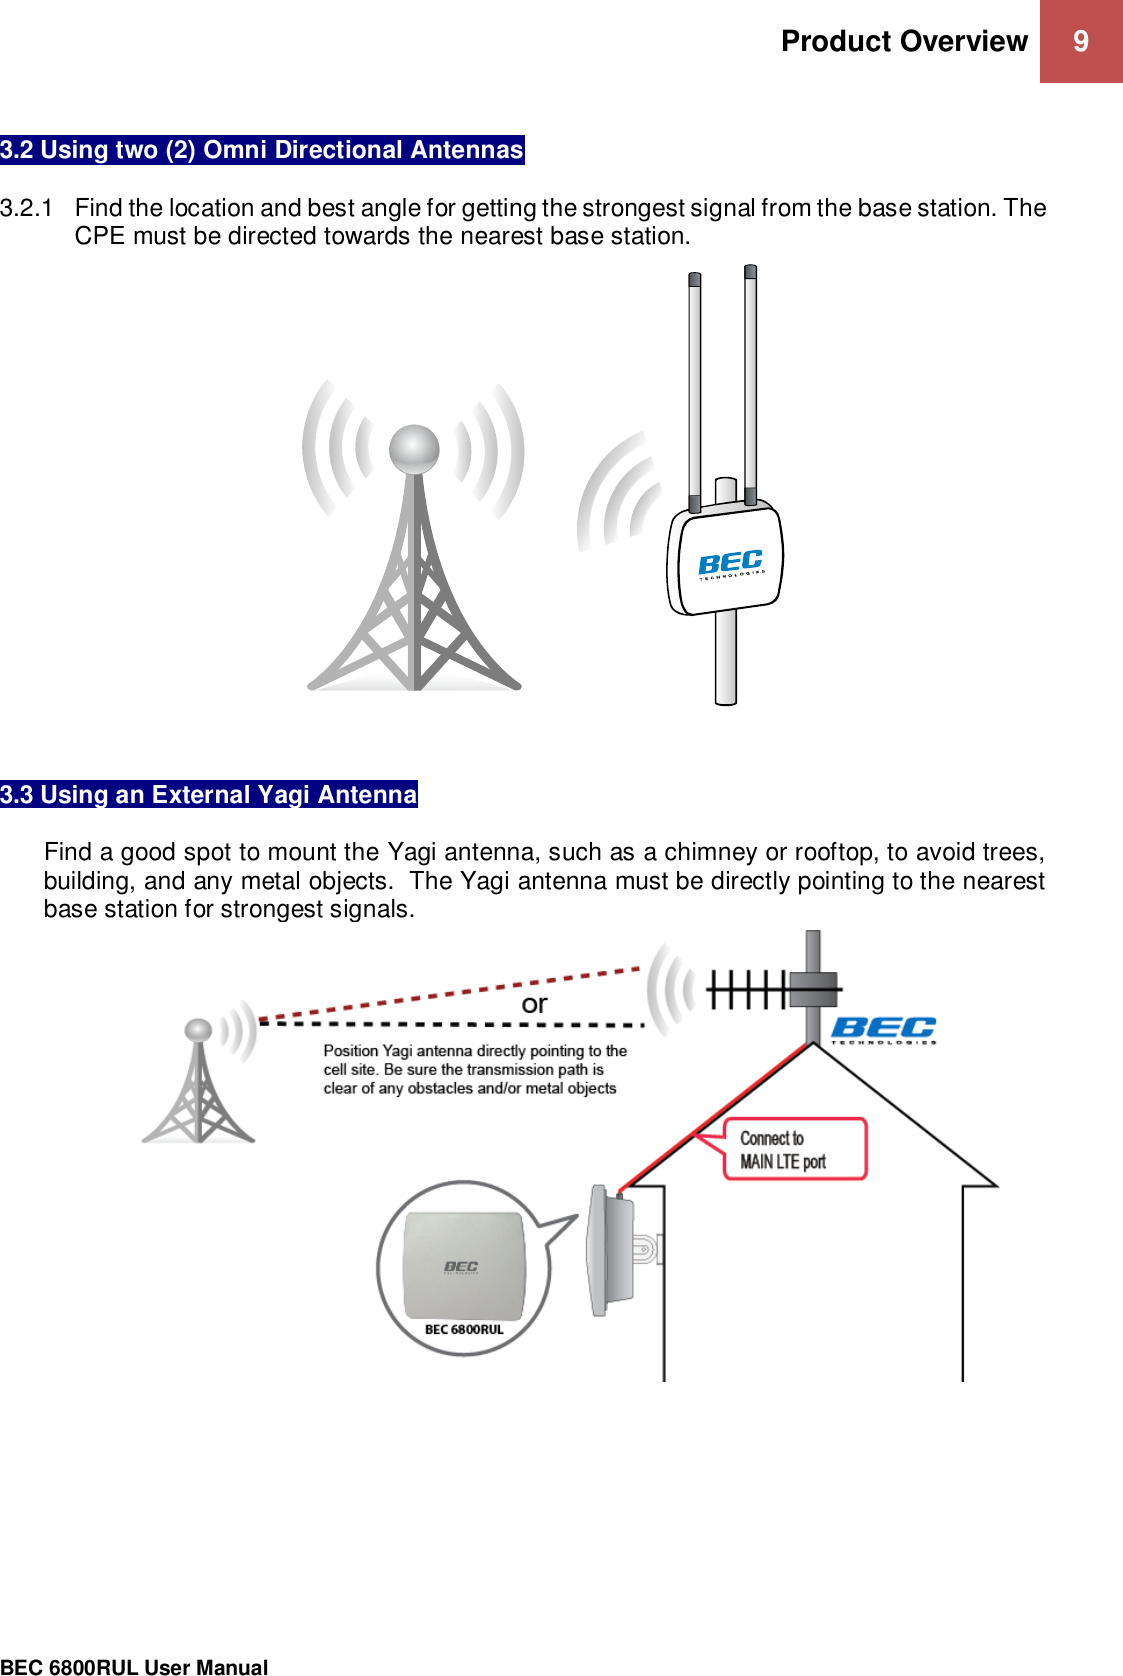 Product Overview 9                                                 BEC 6800RUL User Manual   3.2 Using two (2) Omni Directional Antennas  3.2.1  Find the location and best angle for getting the strongest signal from the base station. The CPE must be directed towards the nearest base station.       3.3 Using an External Yagi Antenna  Find a good spot to mount the Yagi antenna, such as a chimney or rooftop, to avoid trees, building, and any metal objects.  The Yagi antenna must be directly pointing to the nearest base station for strongest signals.                                         